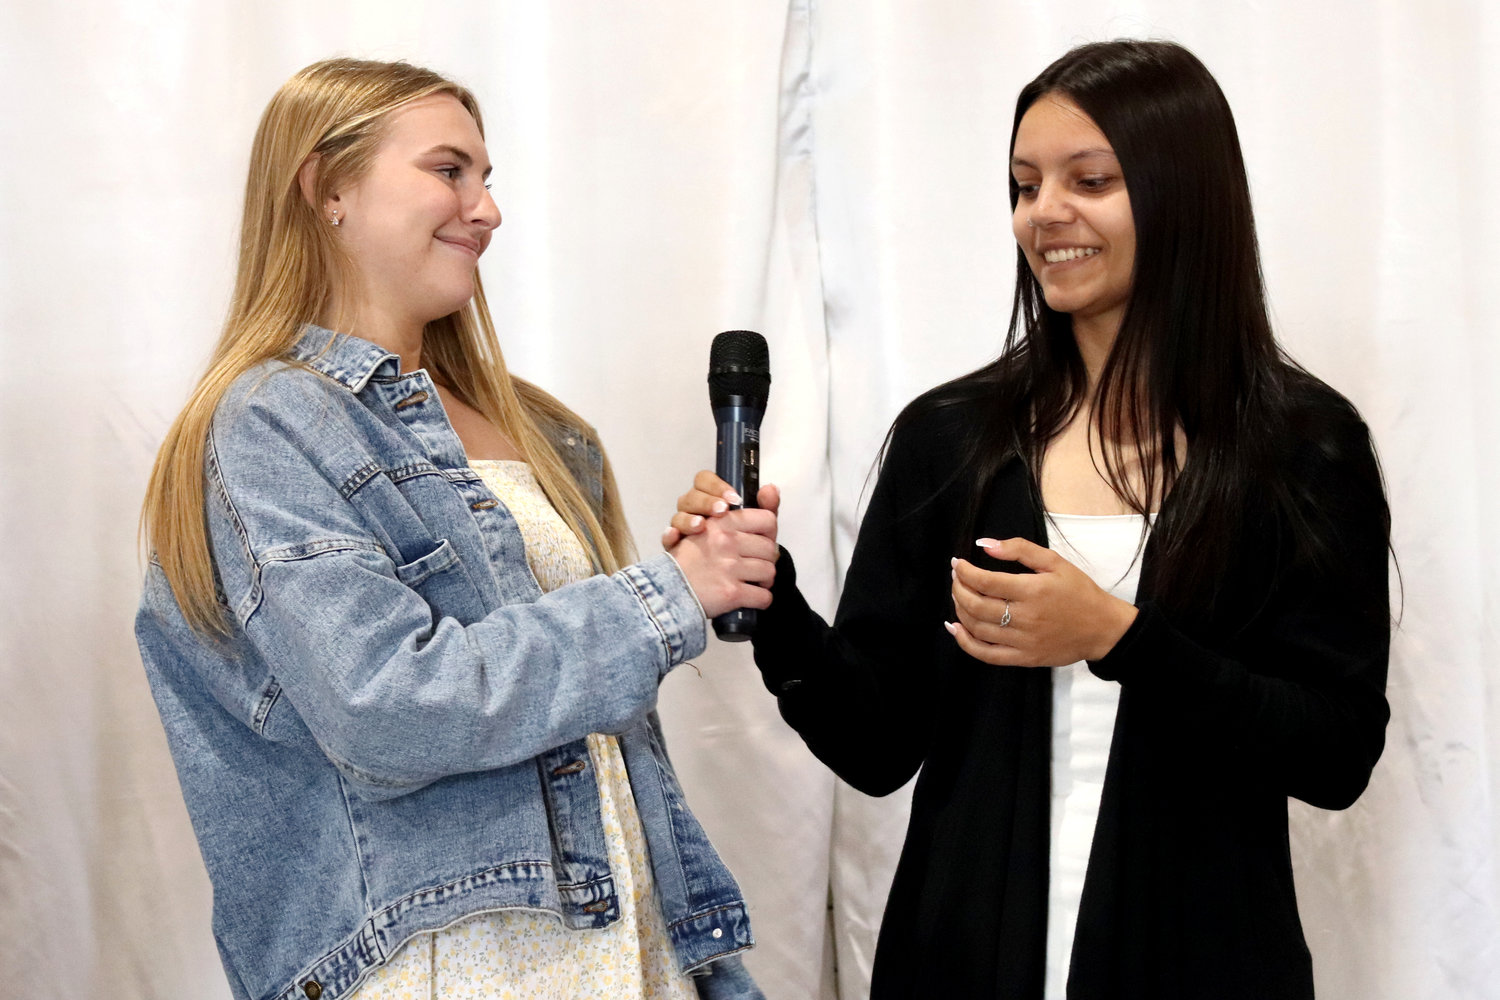 Centralia High School senior Hannah Robbins passes the mic to fellow Centralia senior Madelyn Sievert during the Rob Fuller Top 25 Luncheon in Chehalis on Monday. Both students plan to attend Centralia College.